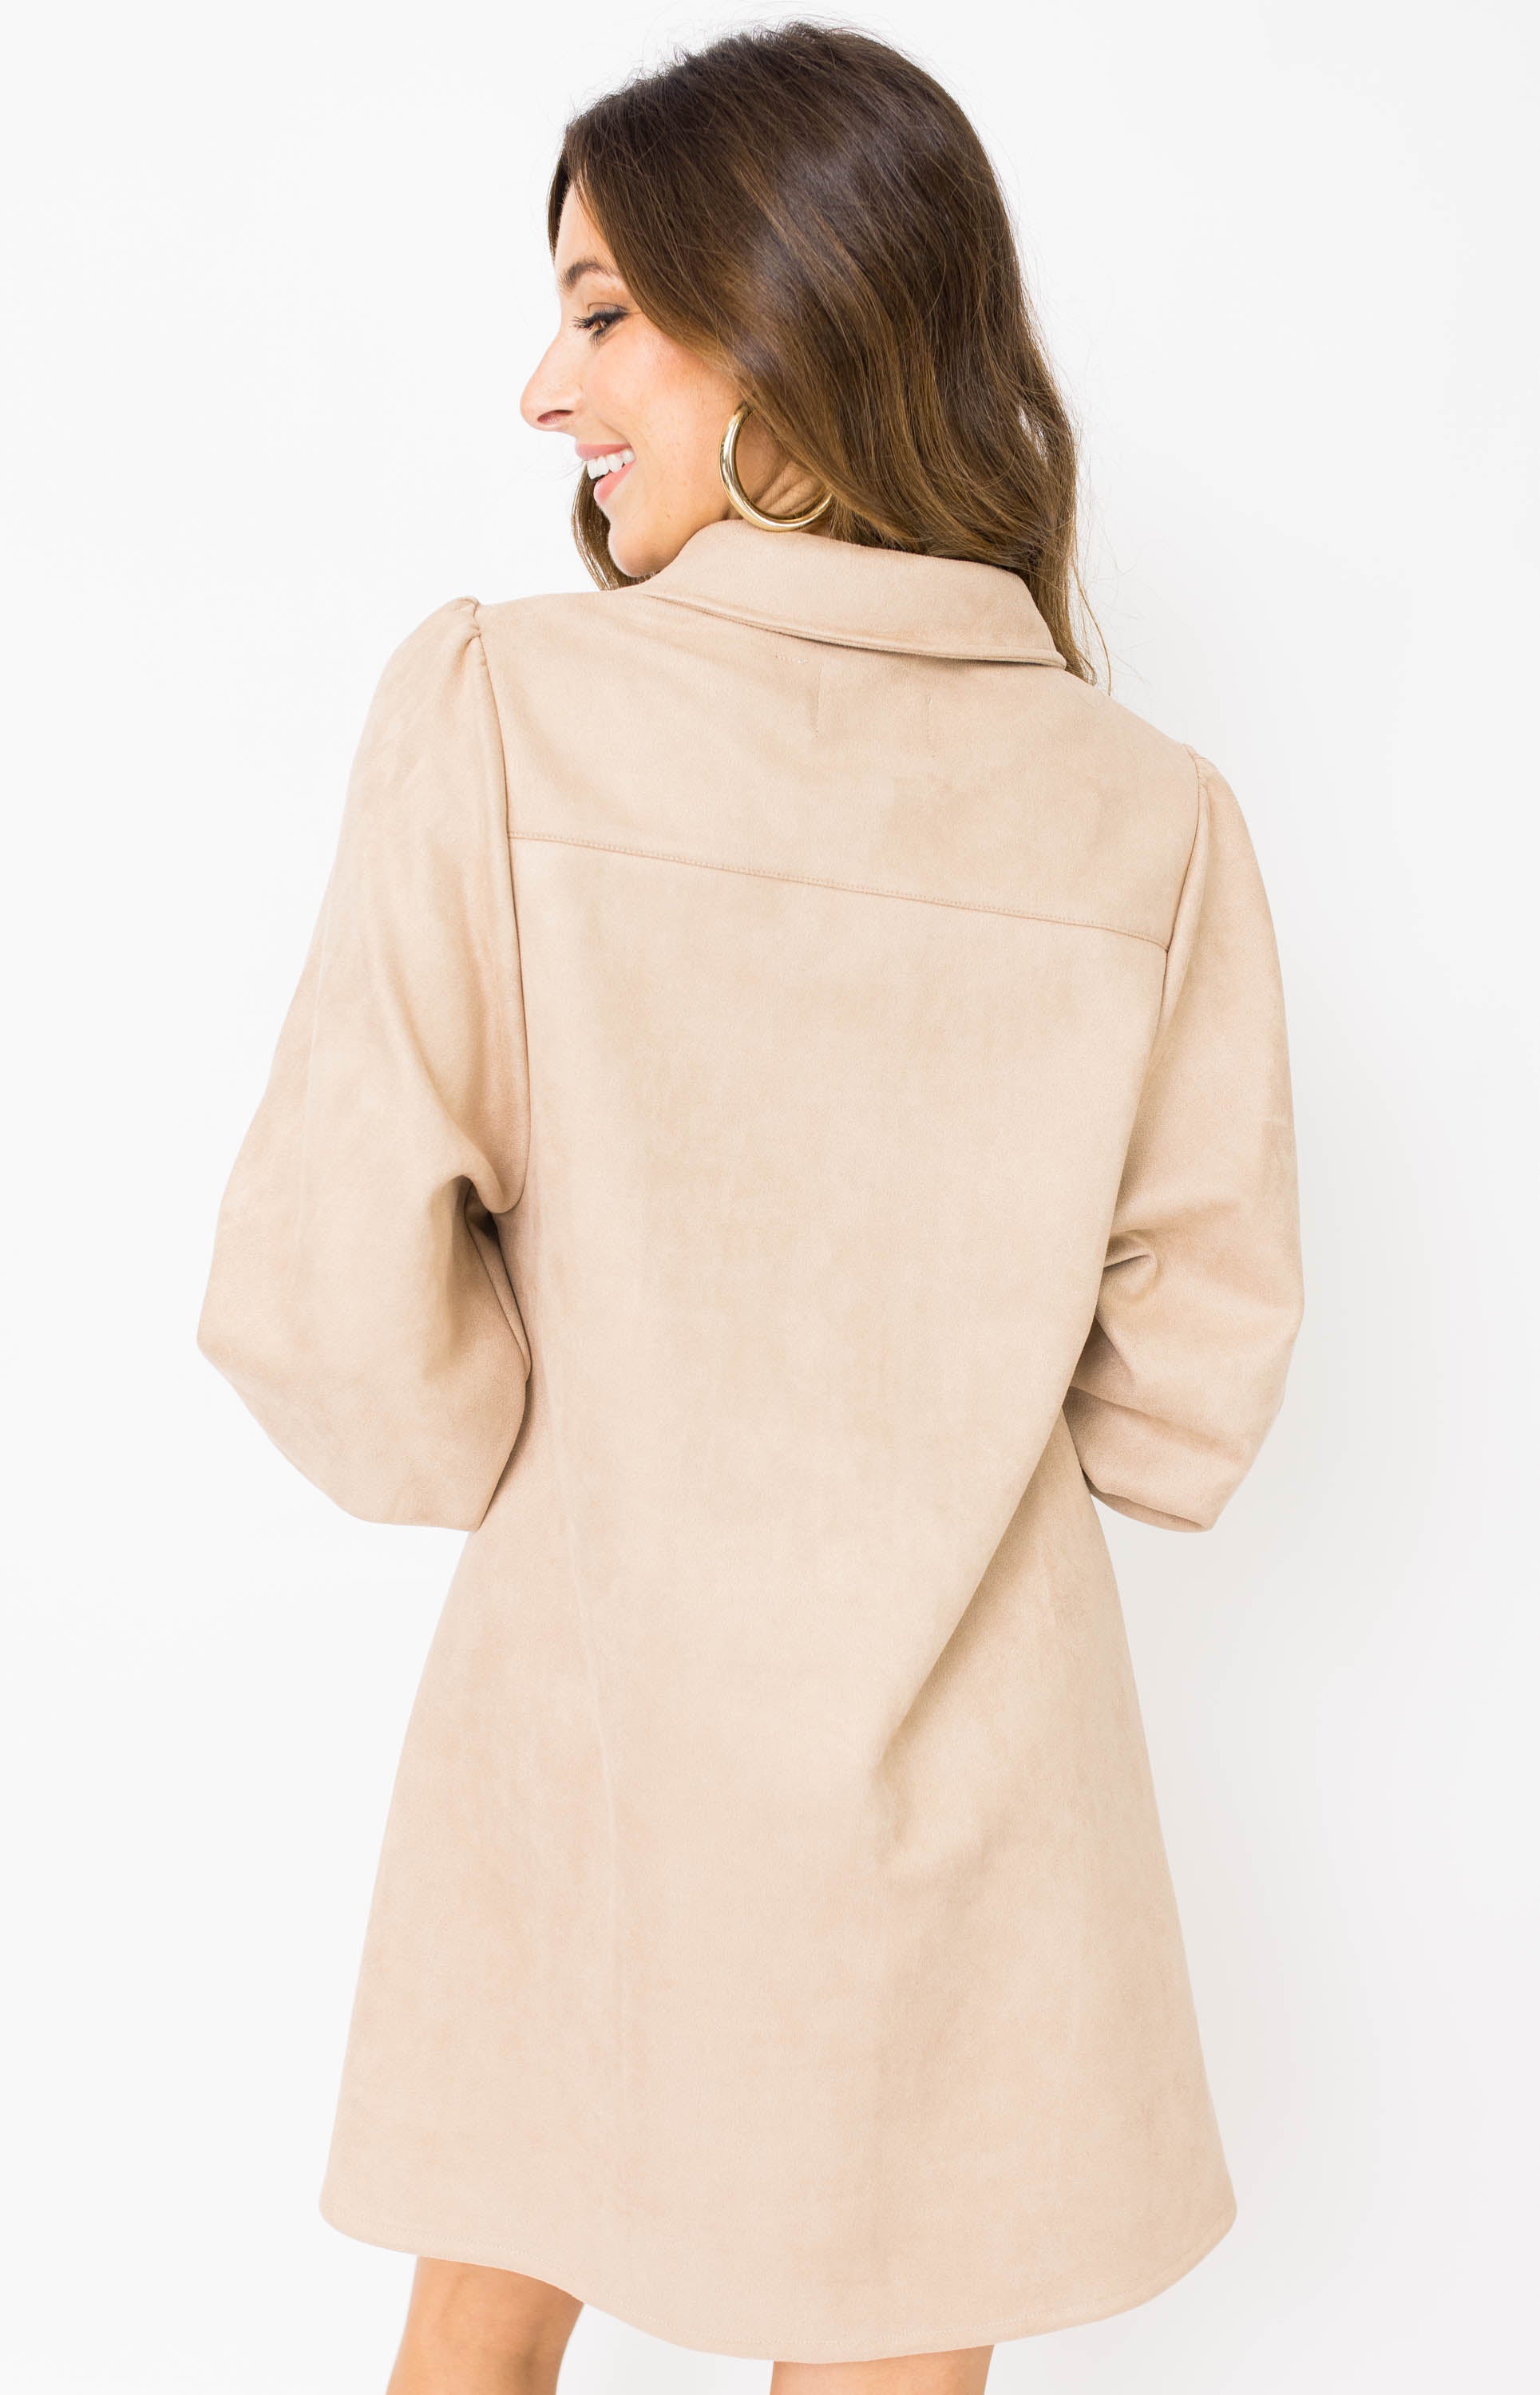 Dolce Cabo: Over the Moon Vegan Suede Mini Dress, CAMEL